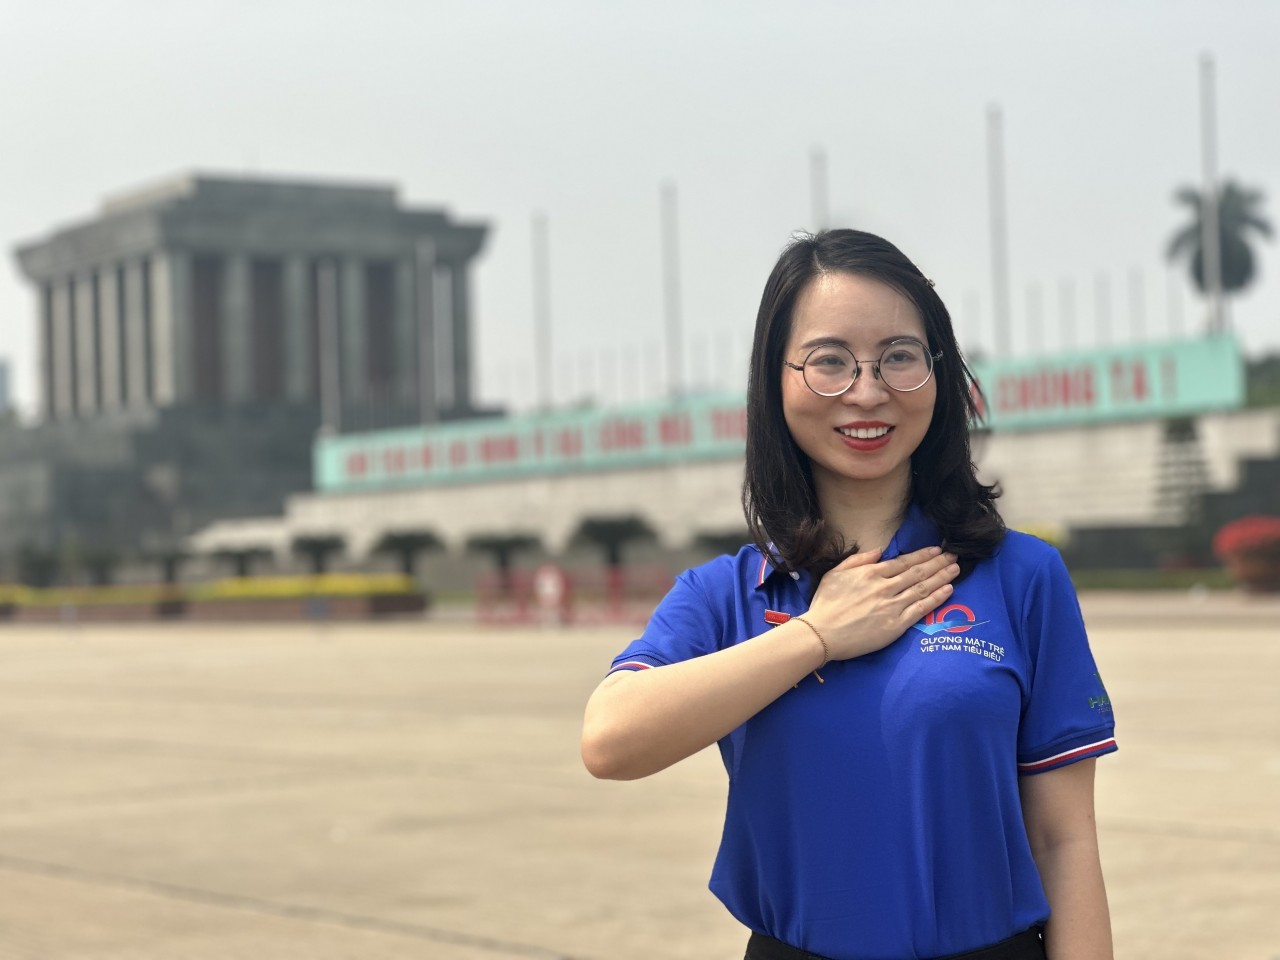 Young Viet Doctor Returns To Homeland to Pursue New Dreams